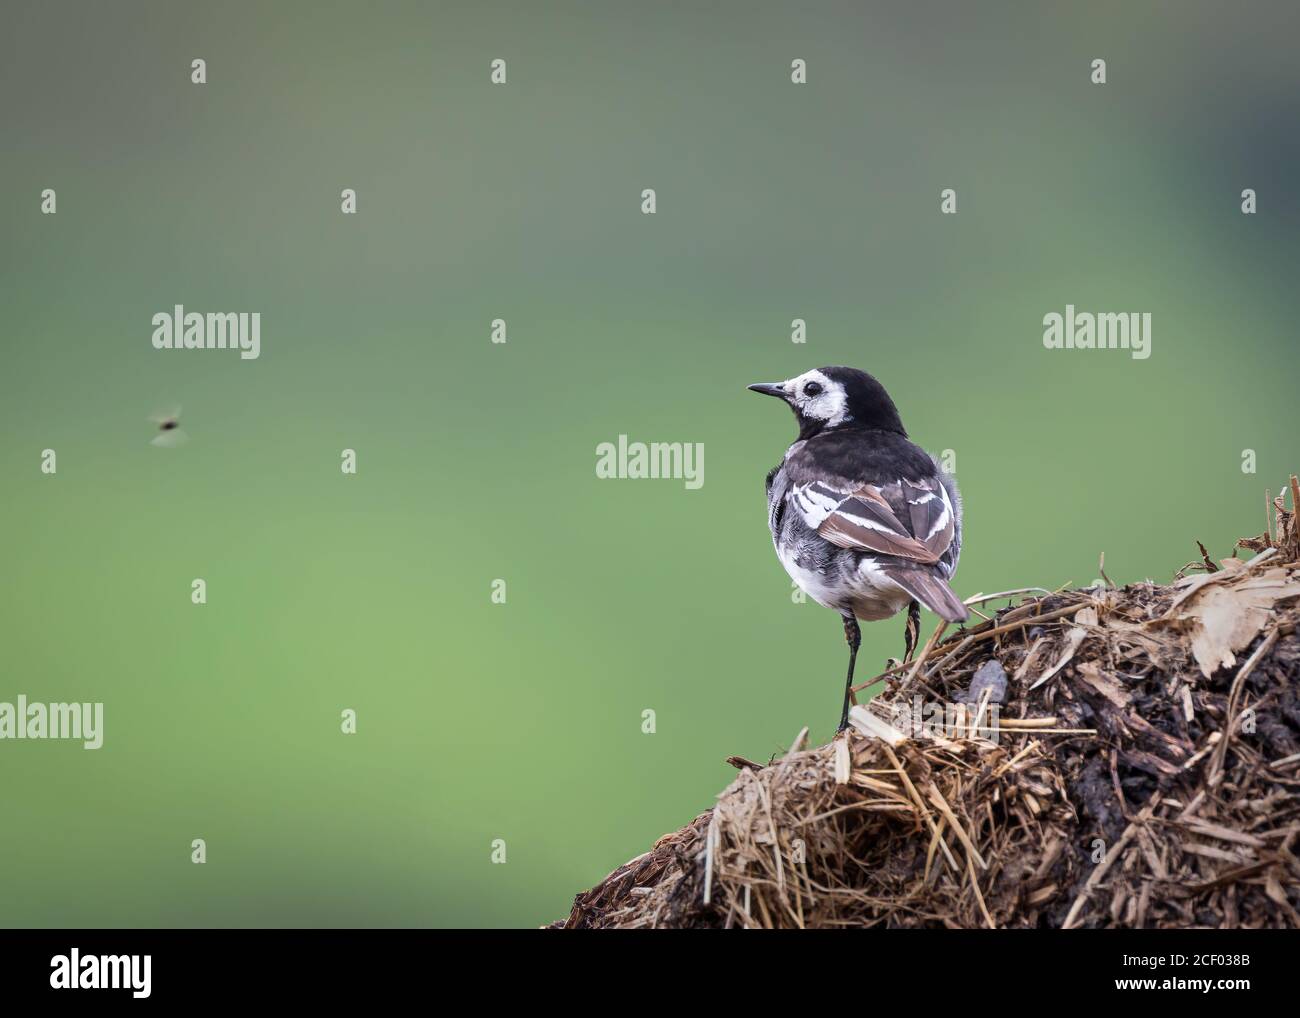 Pied Wagtail on Compost Stock Photo